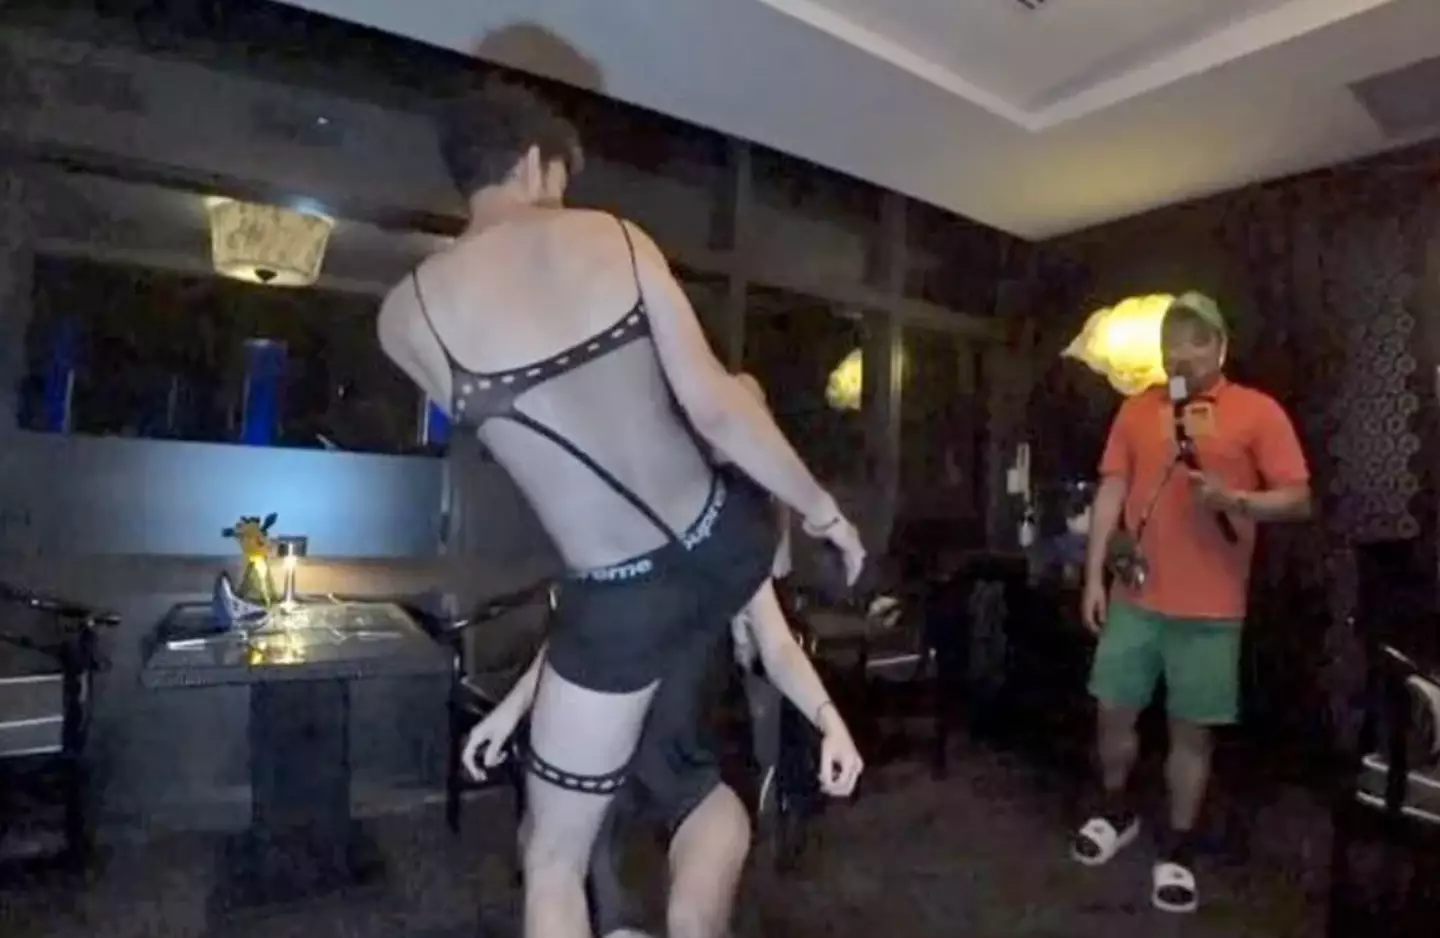 The lap dance that could earn this YouTuber five years in prison.